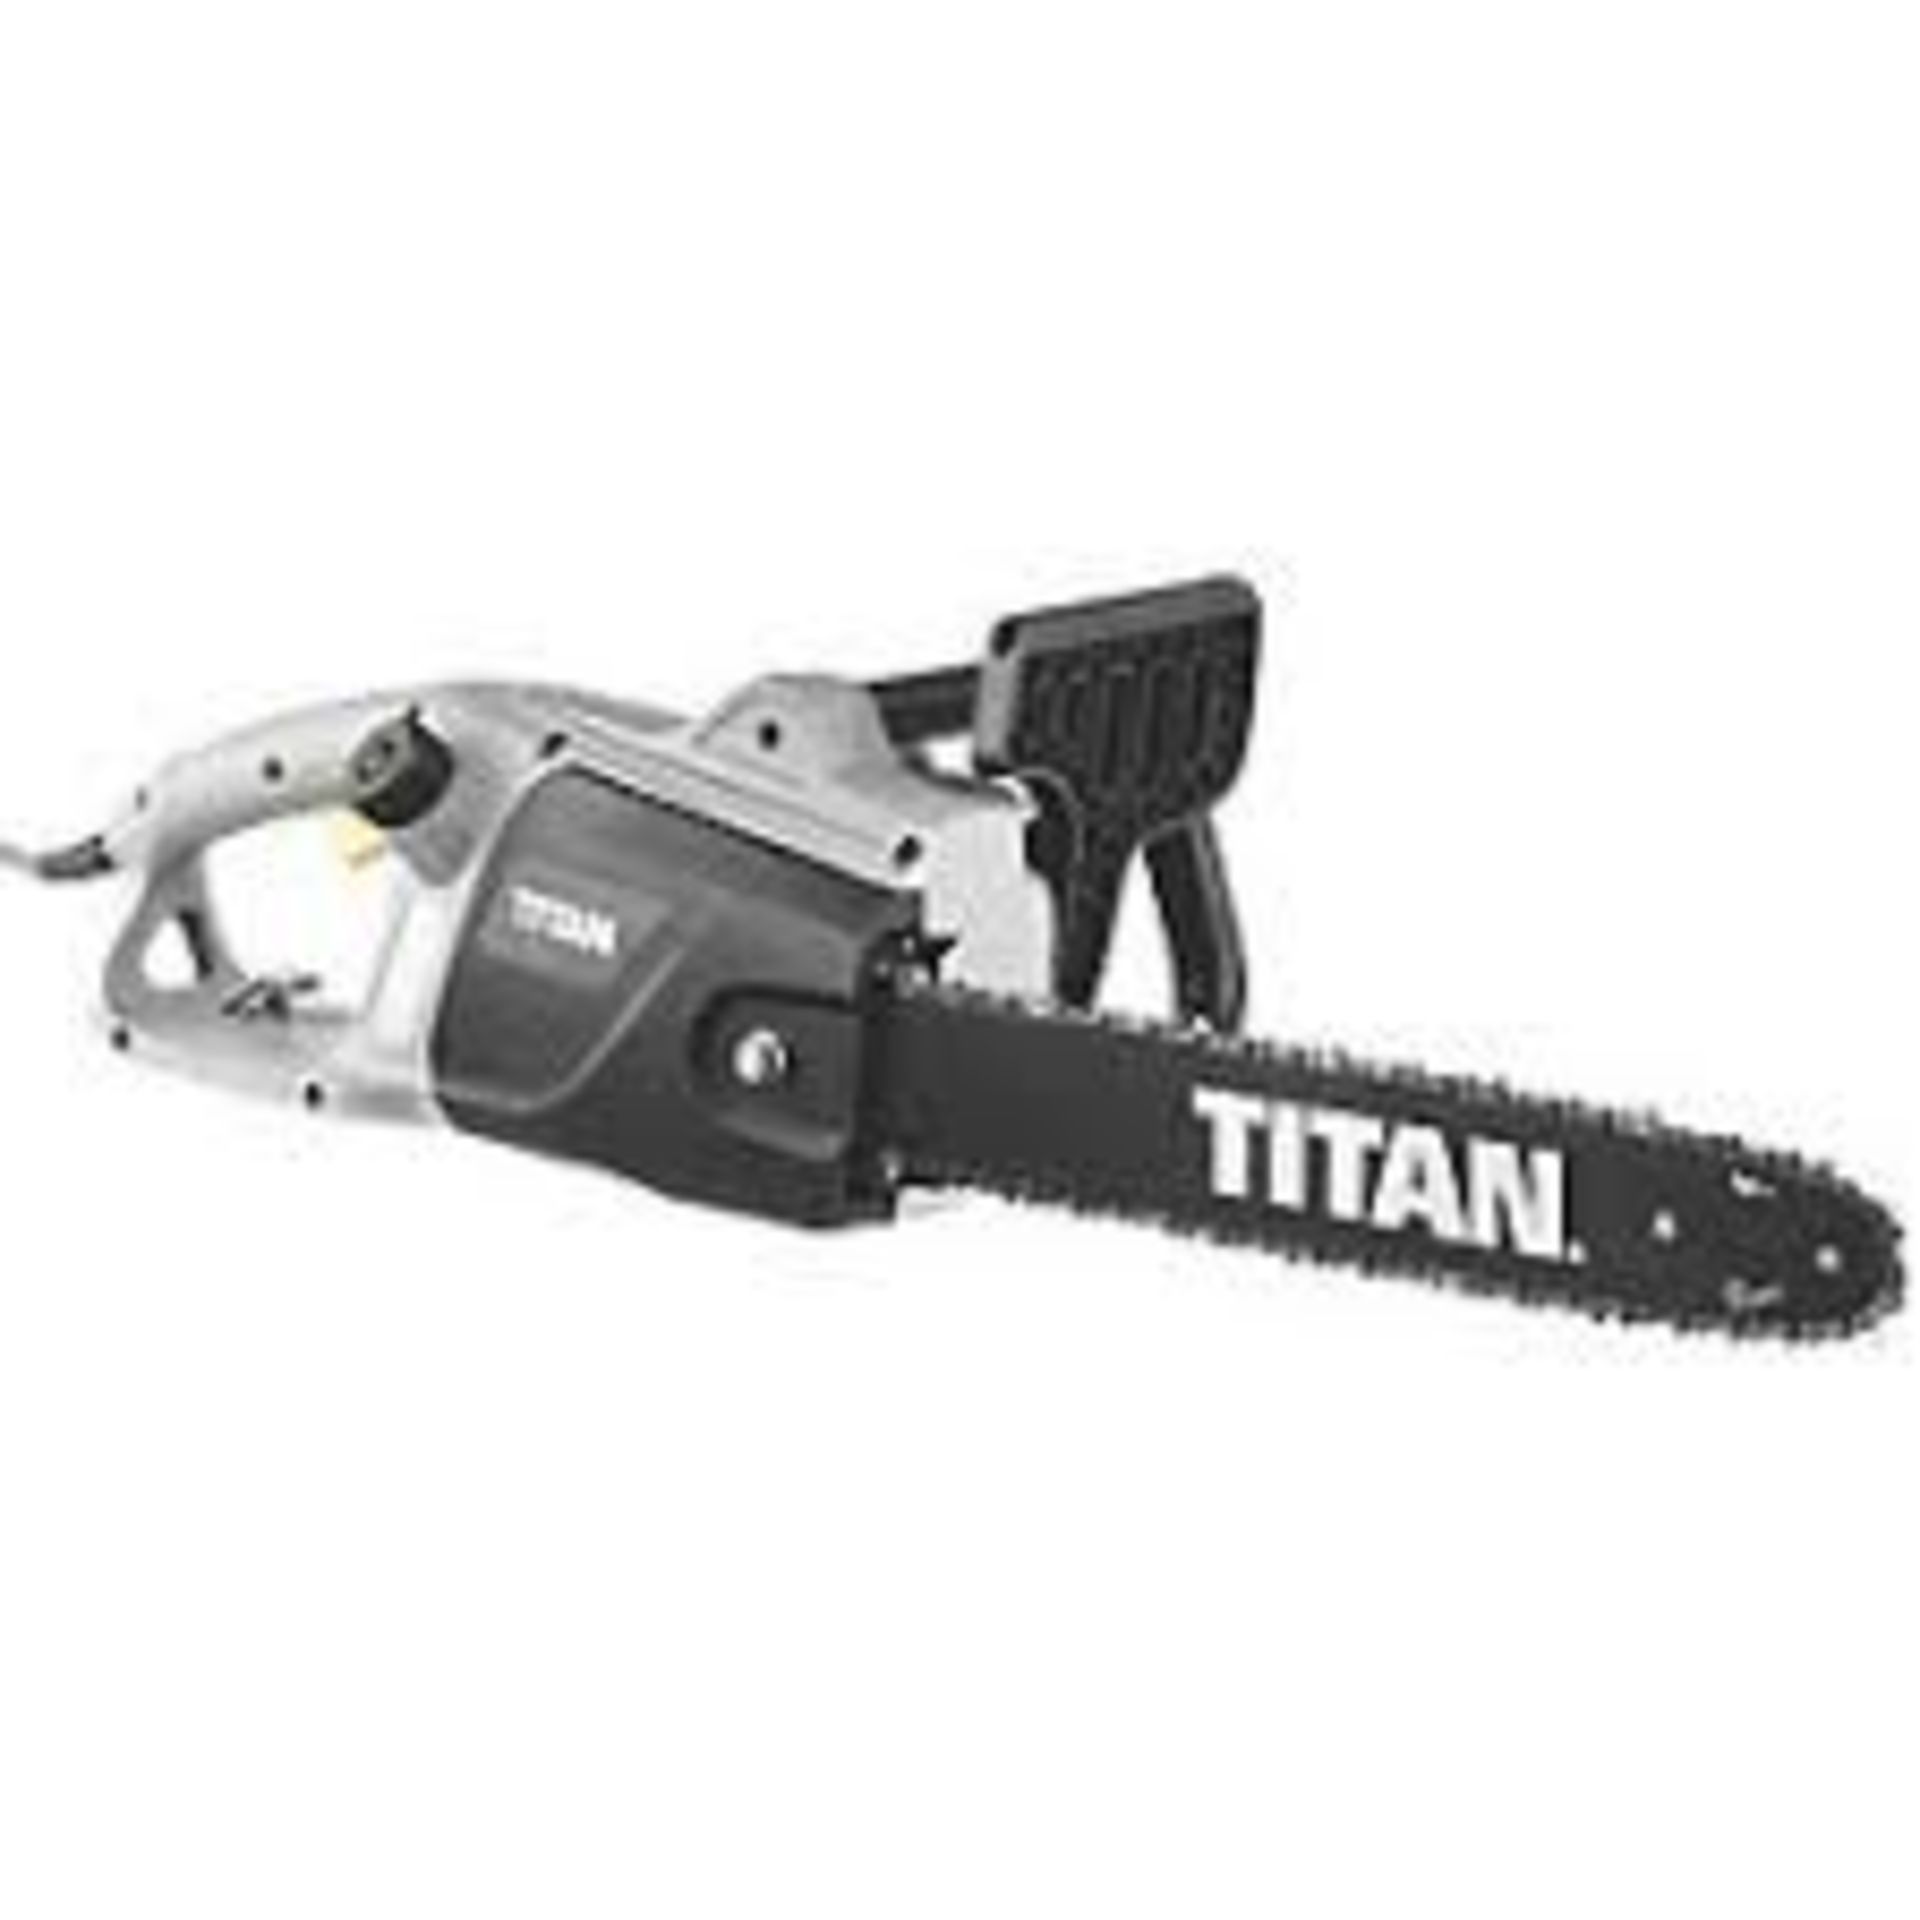 TITAN 2000W 230V ELECTRIC 40CM CHAINSAW. - R14.10. Electric chainsaw with powerful motor and